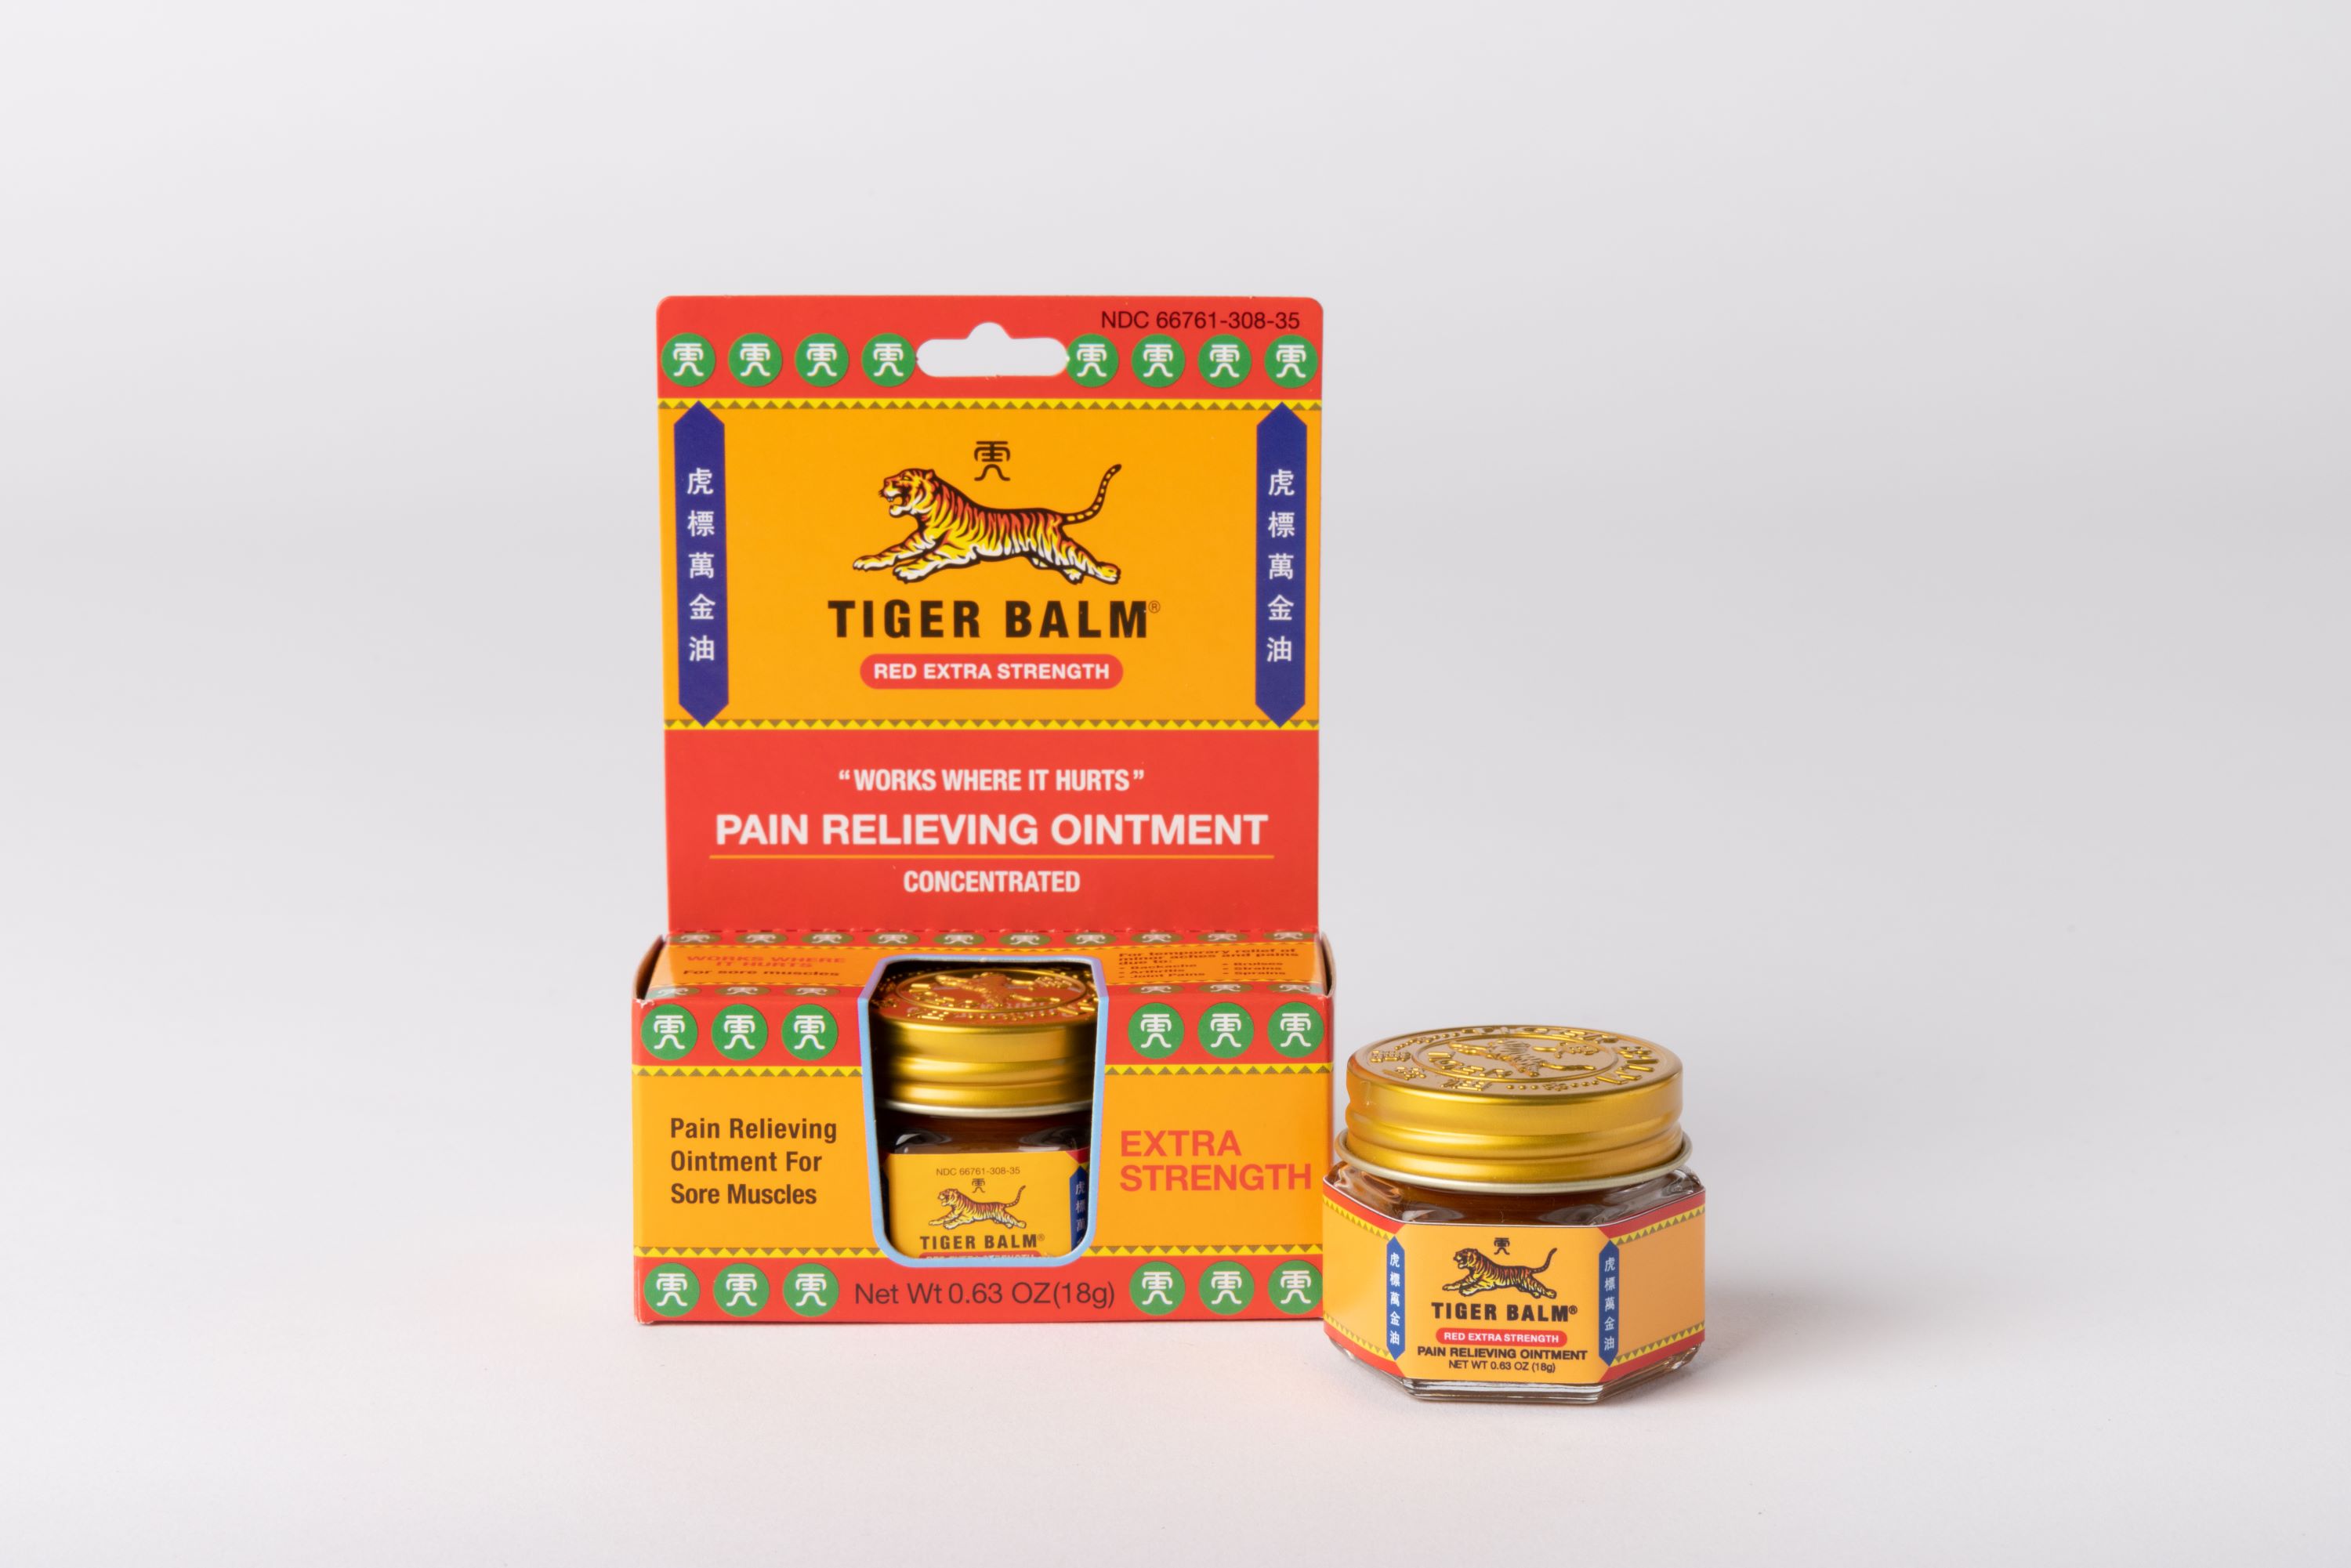 Tiger Balm Extra Strength Pain Relieving Ointment, 0.63 oz Jar for Arthritis Joint Pain Backaches Strains and Sore Muscles - image 2 of 9